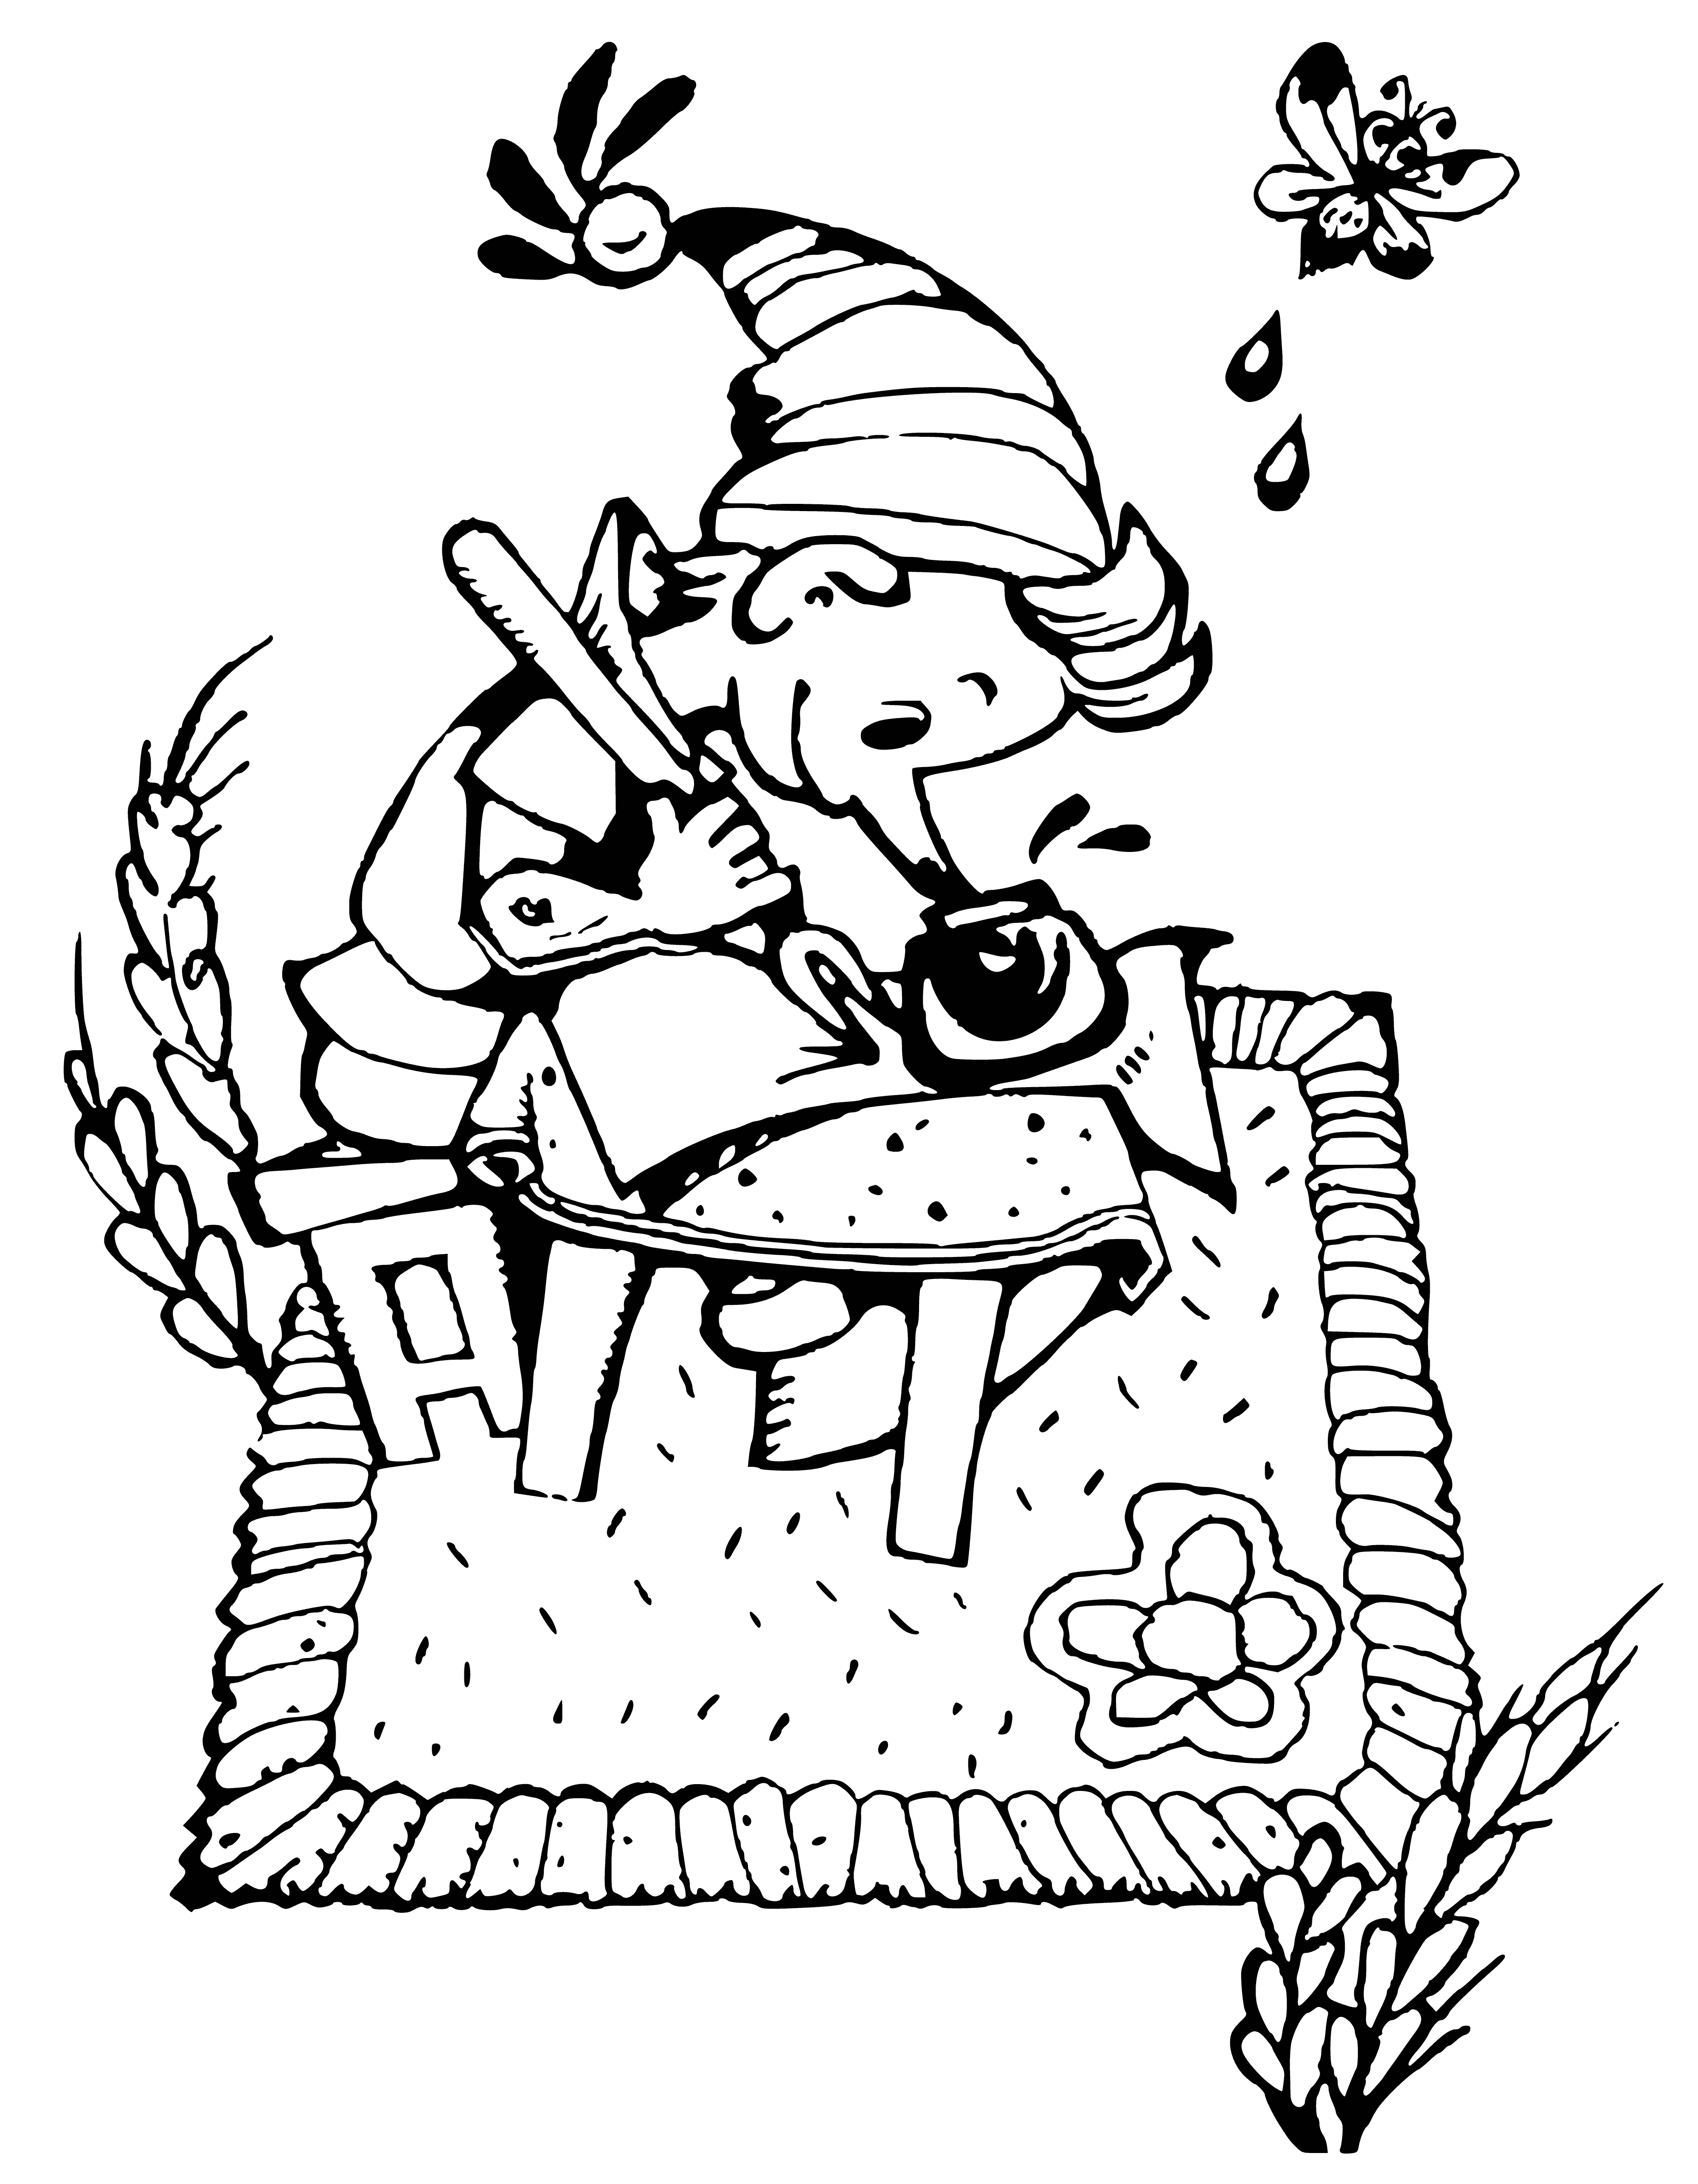 coloring page: Puppet cries, arms spread, resting head on hands atop books.